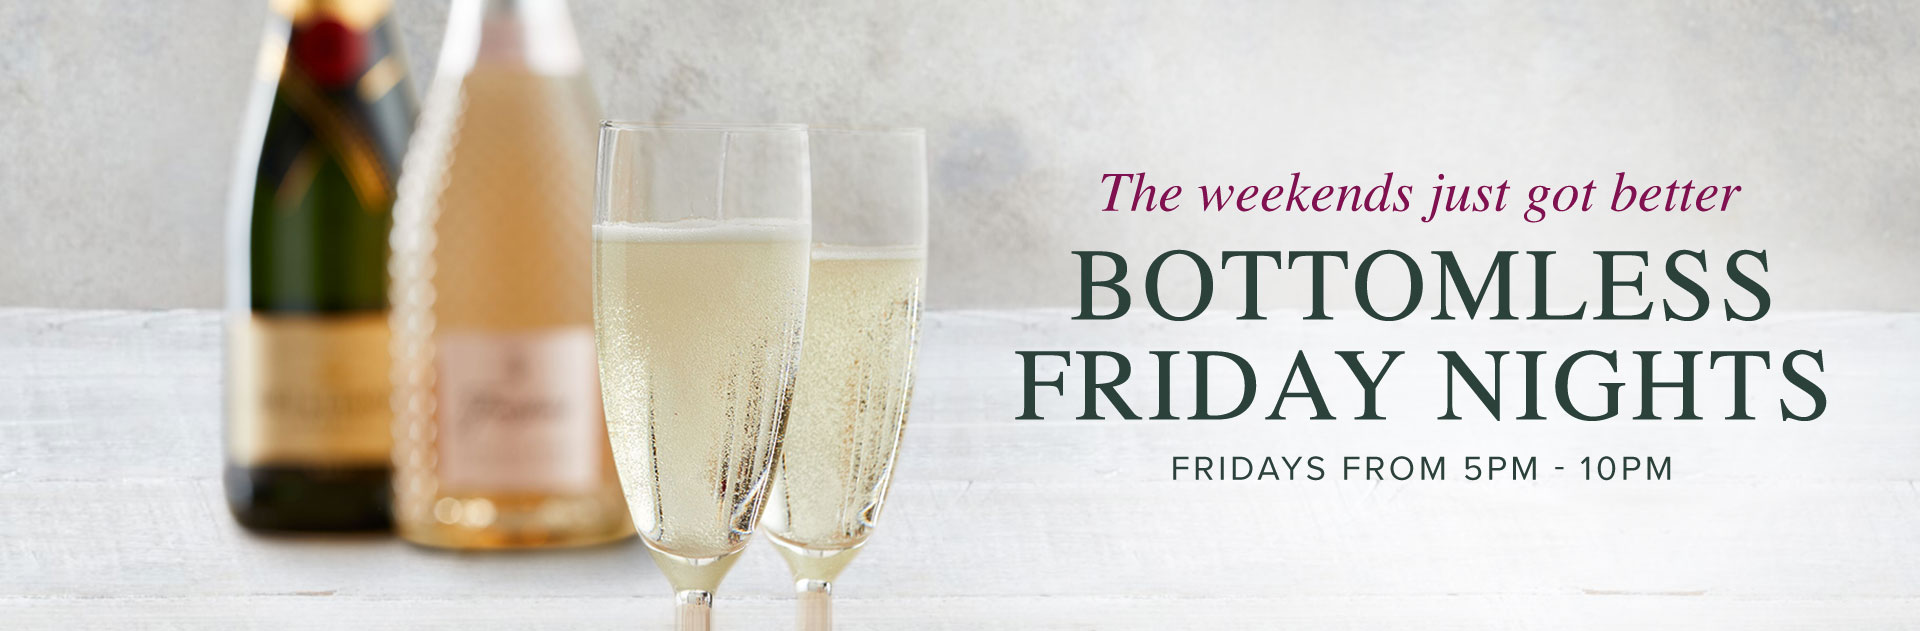 Bottomless Friday at Fox & Dogs Sutton